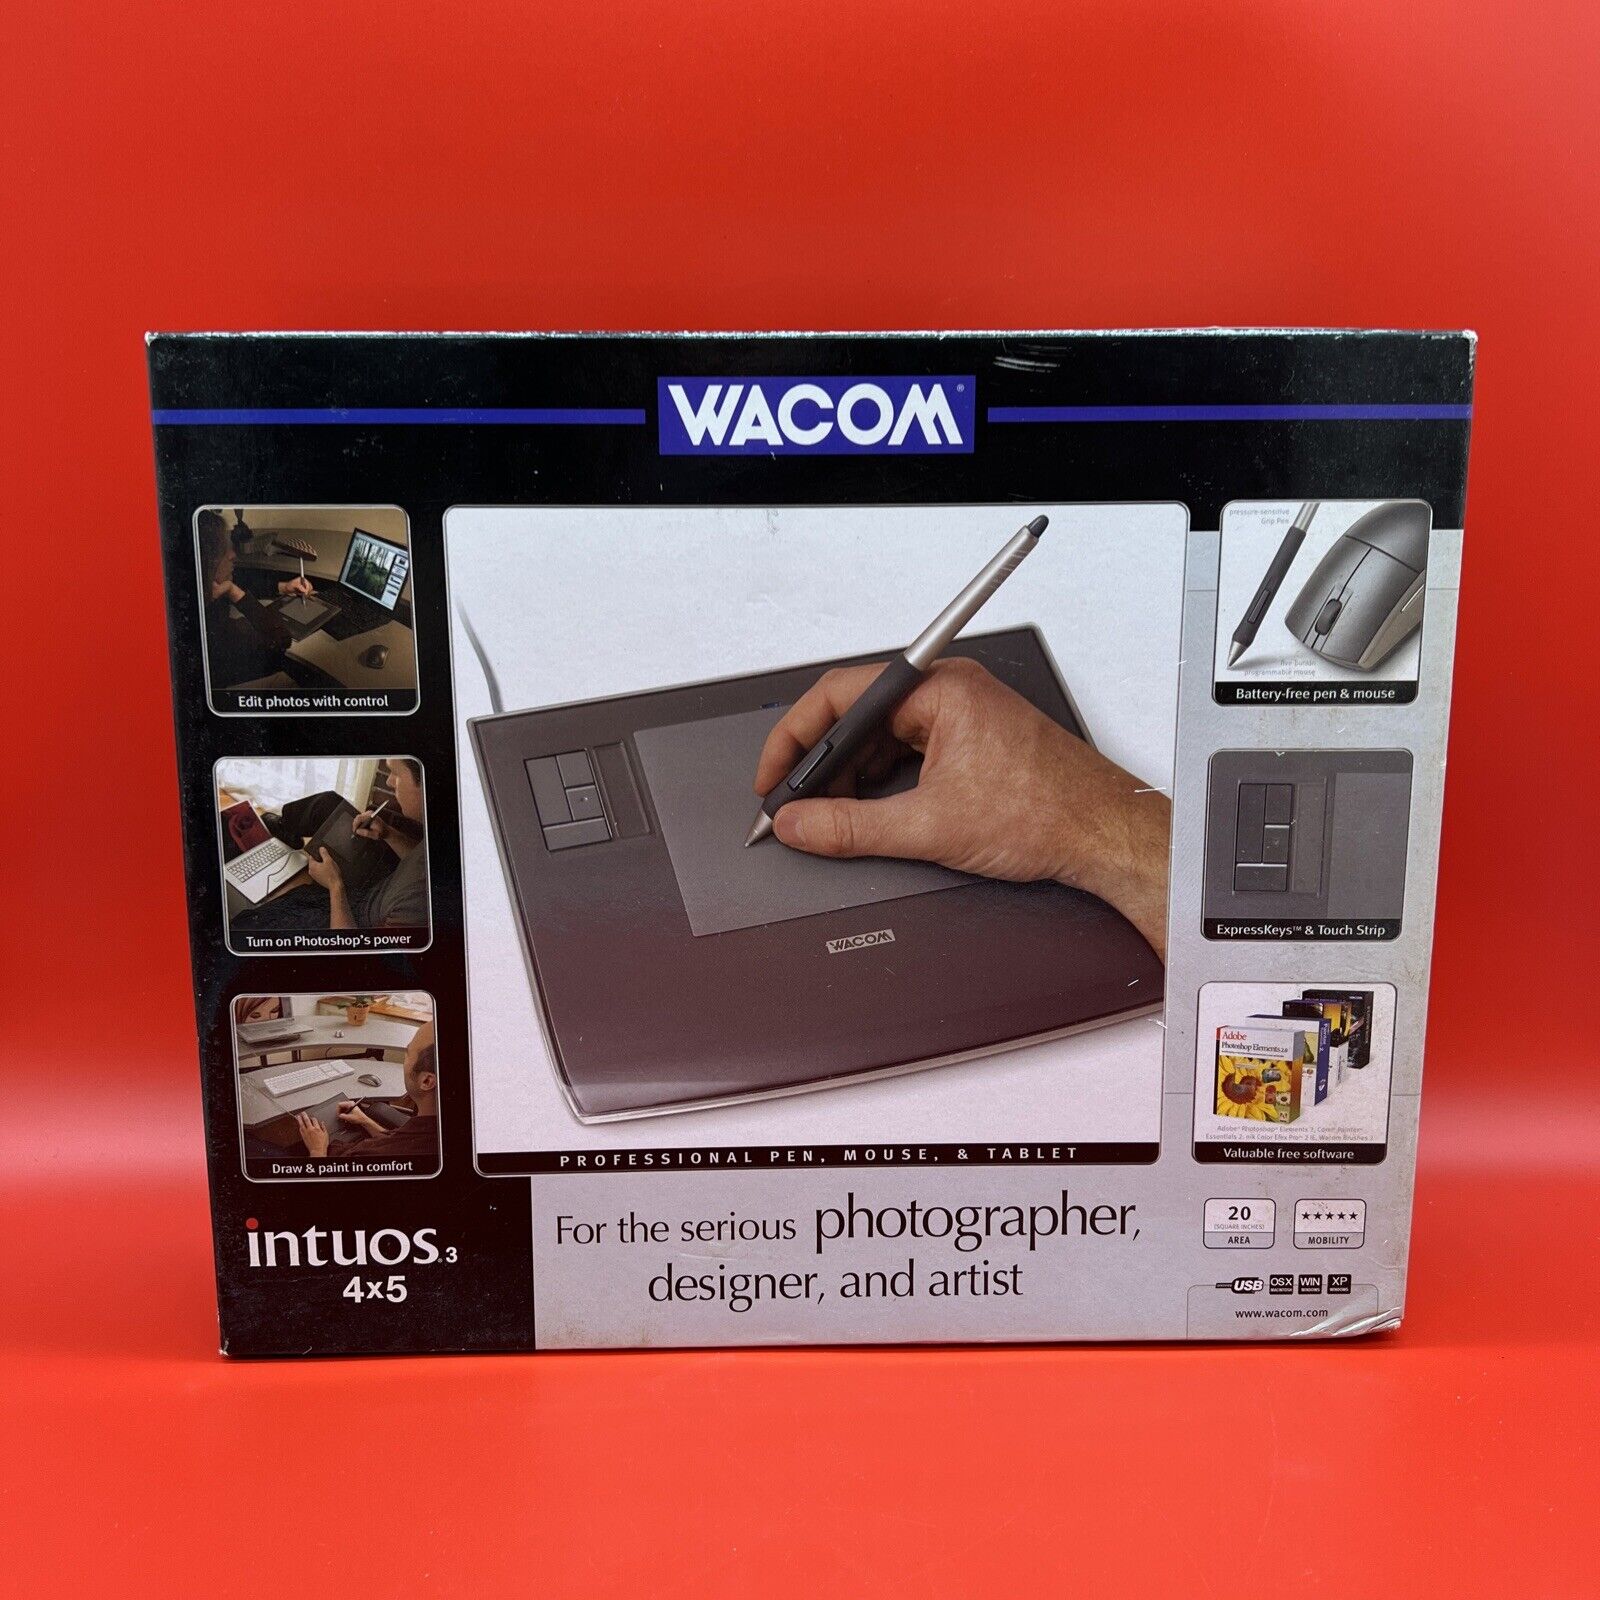 Wacom Intuos3 4 X 5 USB Graphics Tablet PTZ430 with Intuos3 Pen Vintage In Box